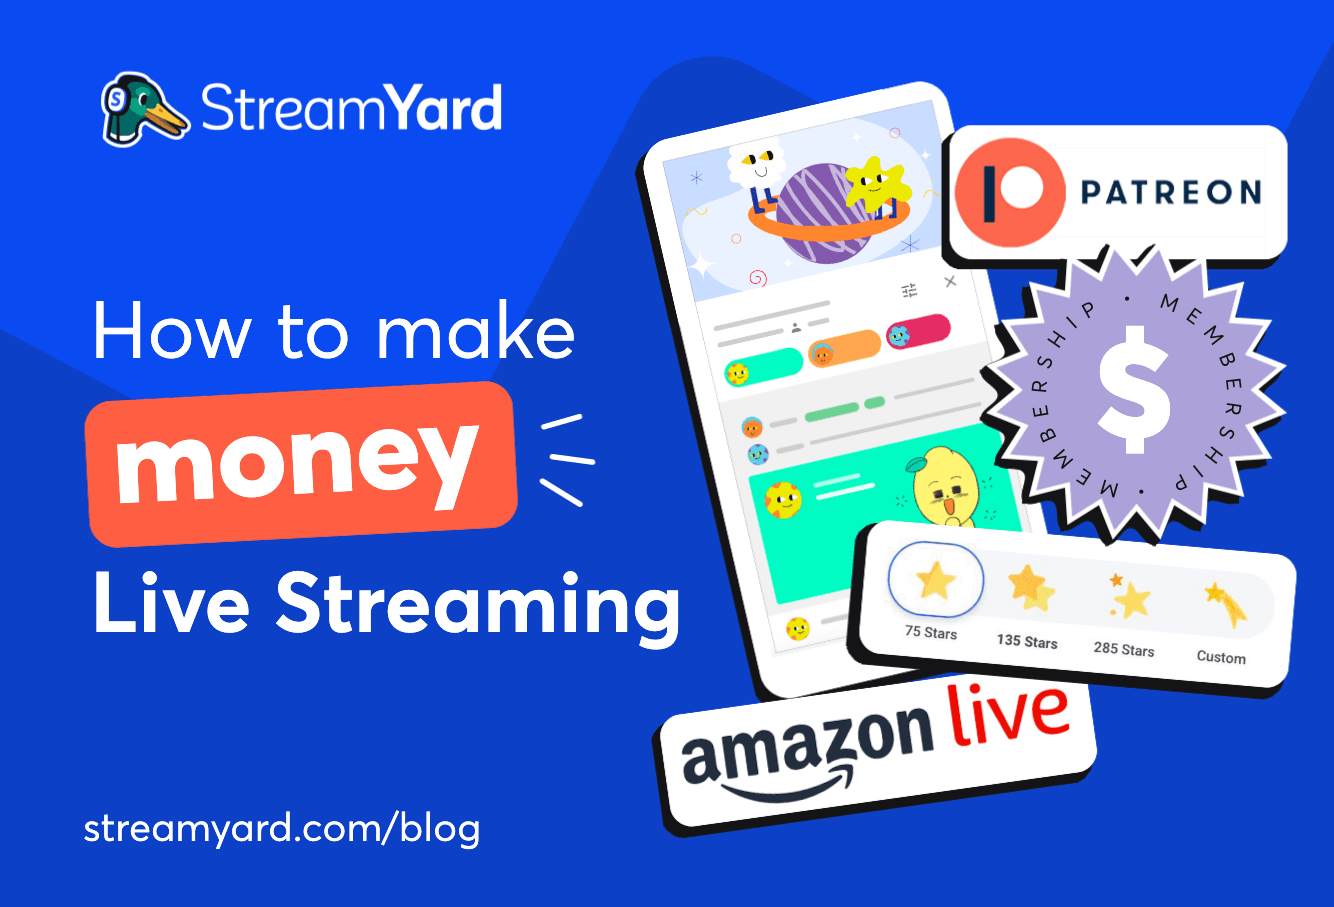 Learn ways that you can make money with live streaming, from donations to affiliate marketing, Amazon Live and more!